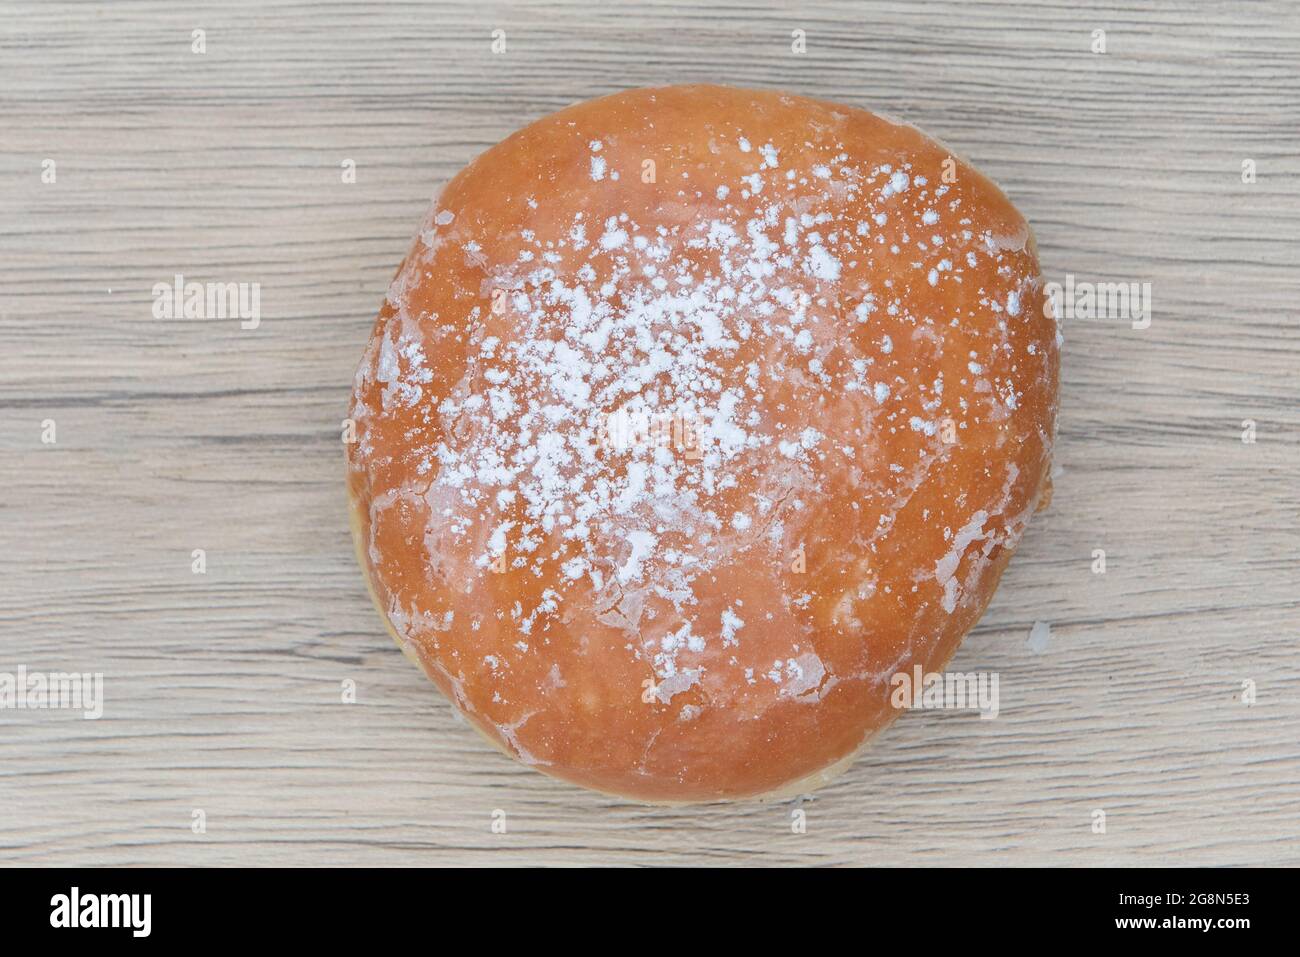 Overhead view of lemon filled glazed donut is textured with powdered sugar coating for a sweet treat delight. Stock Photo